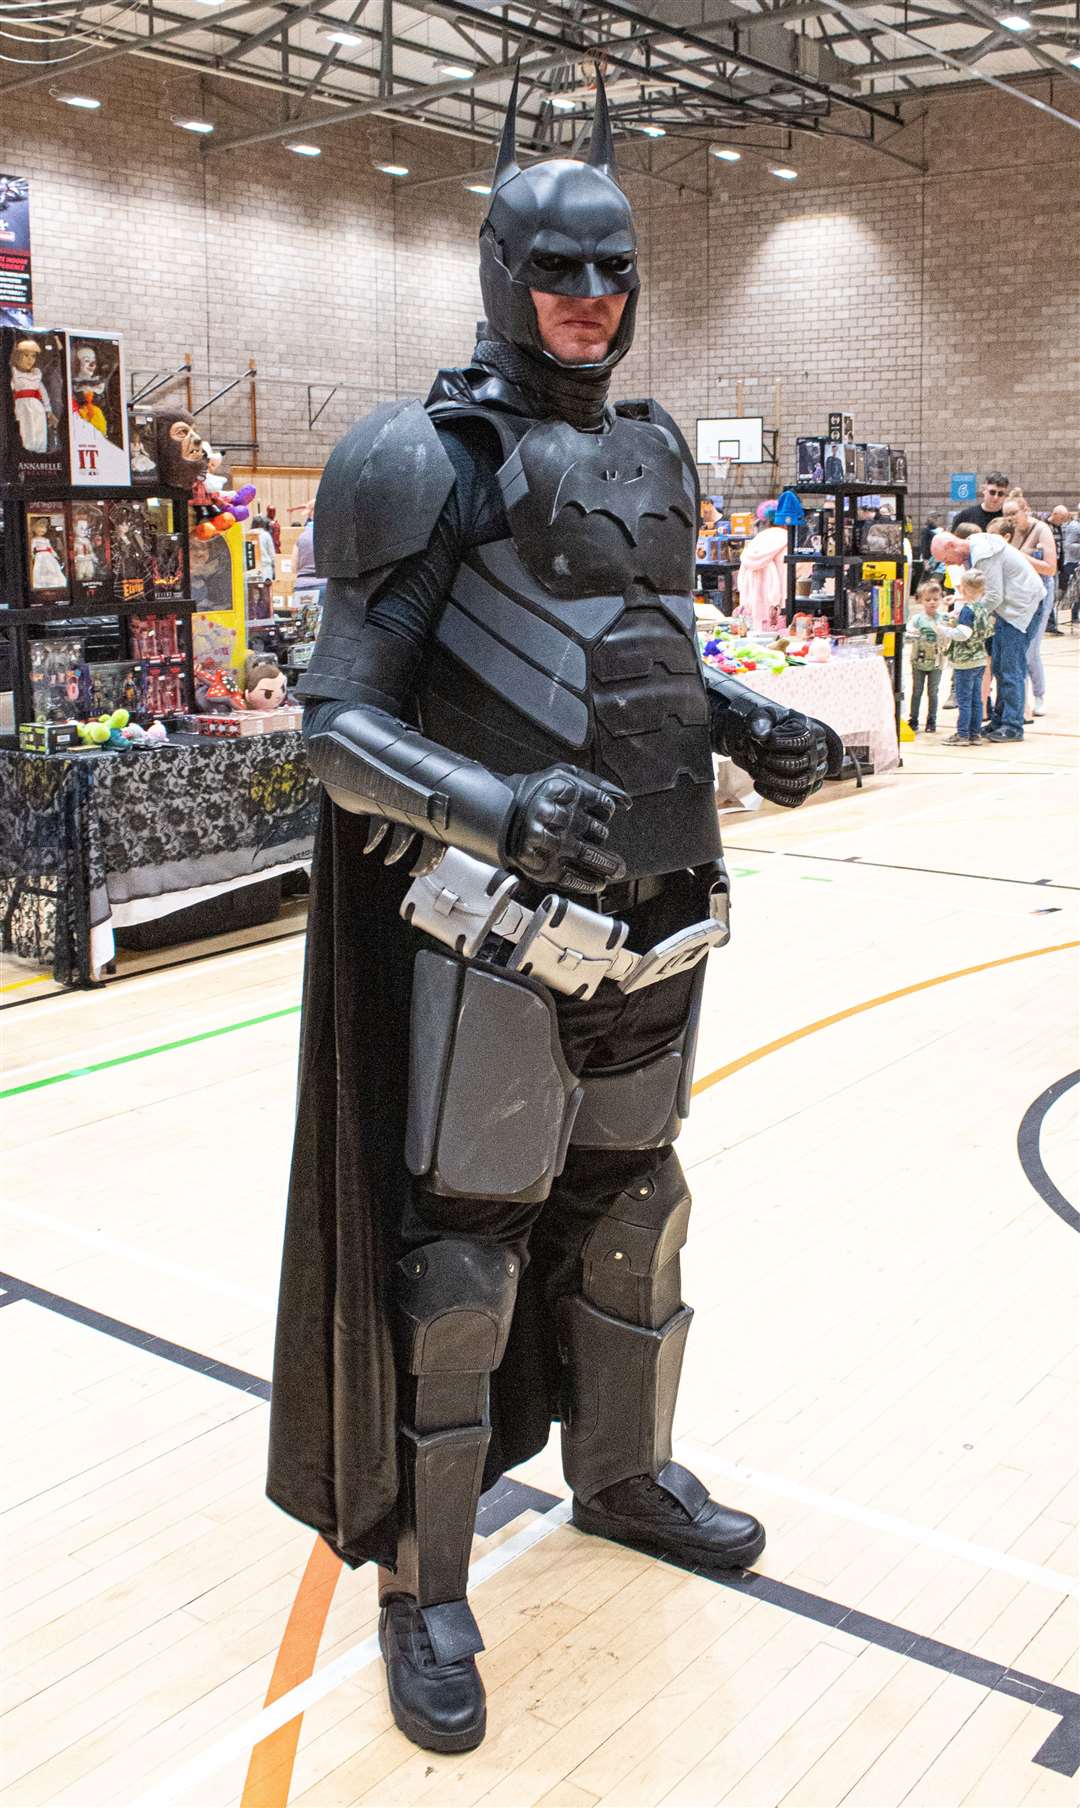 Wayne from Inverness answered ComiCon's signal on Saturday, dressed as Batman. Photo: Niall Harkiss